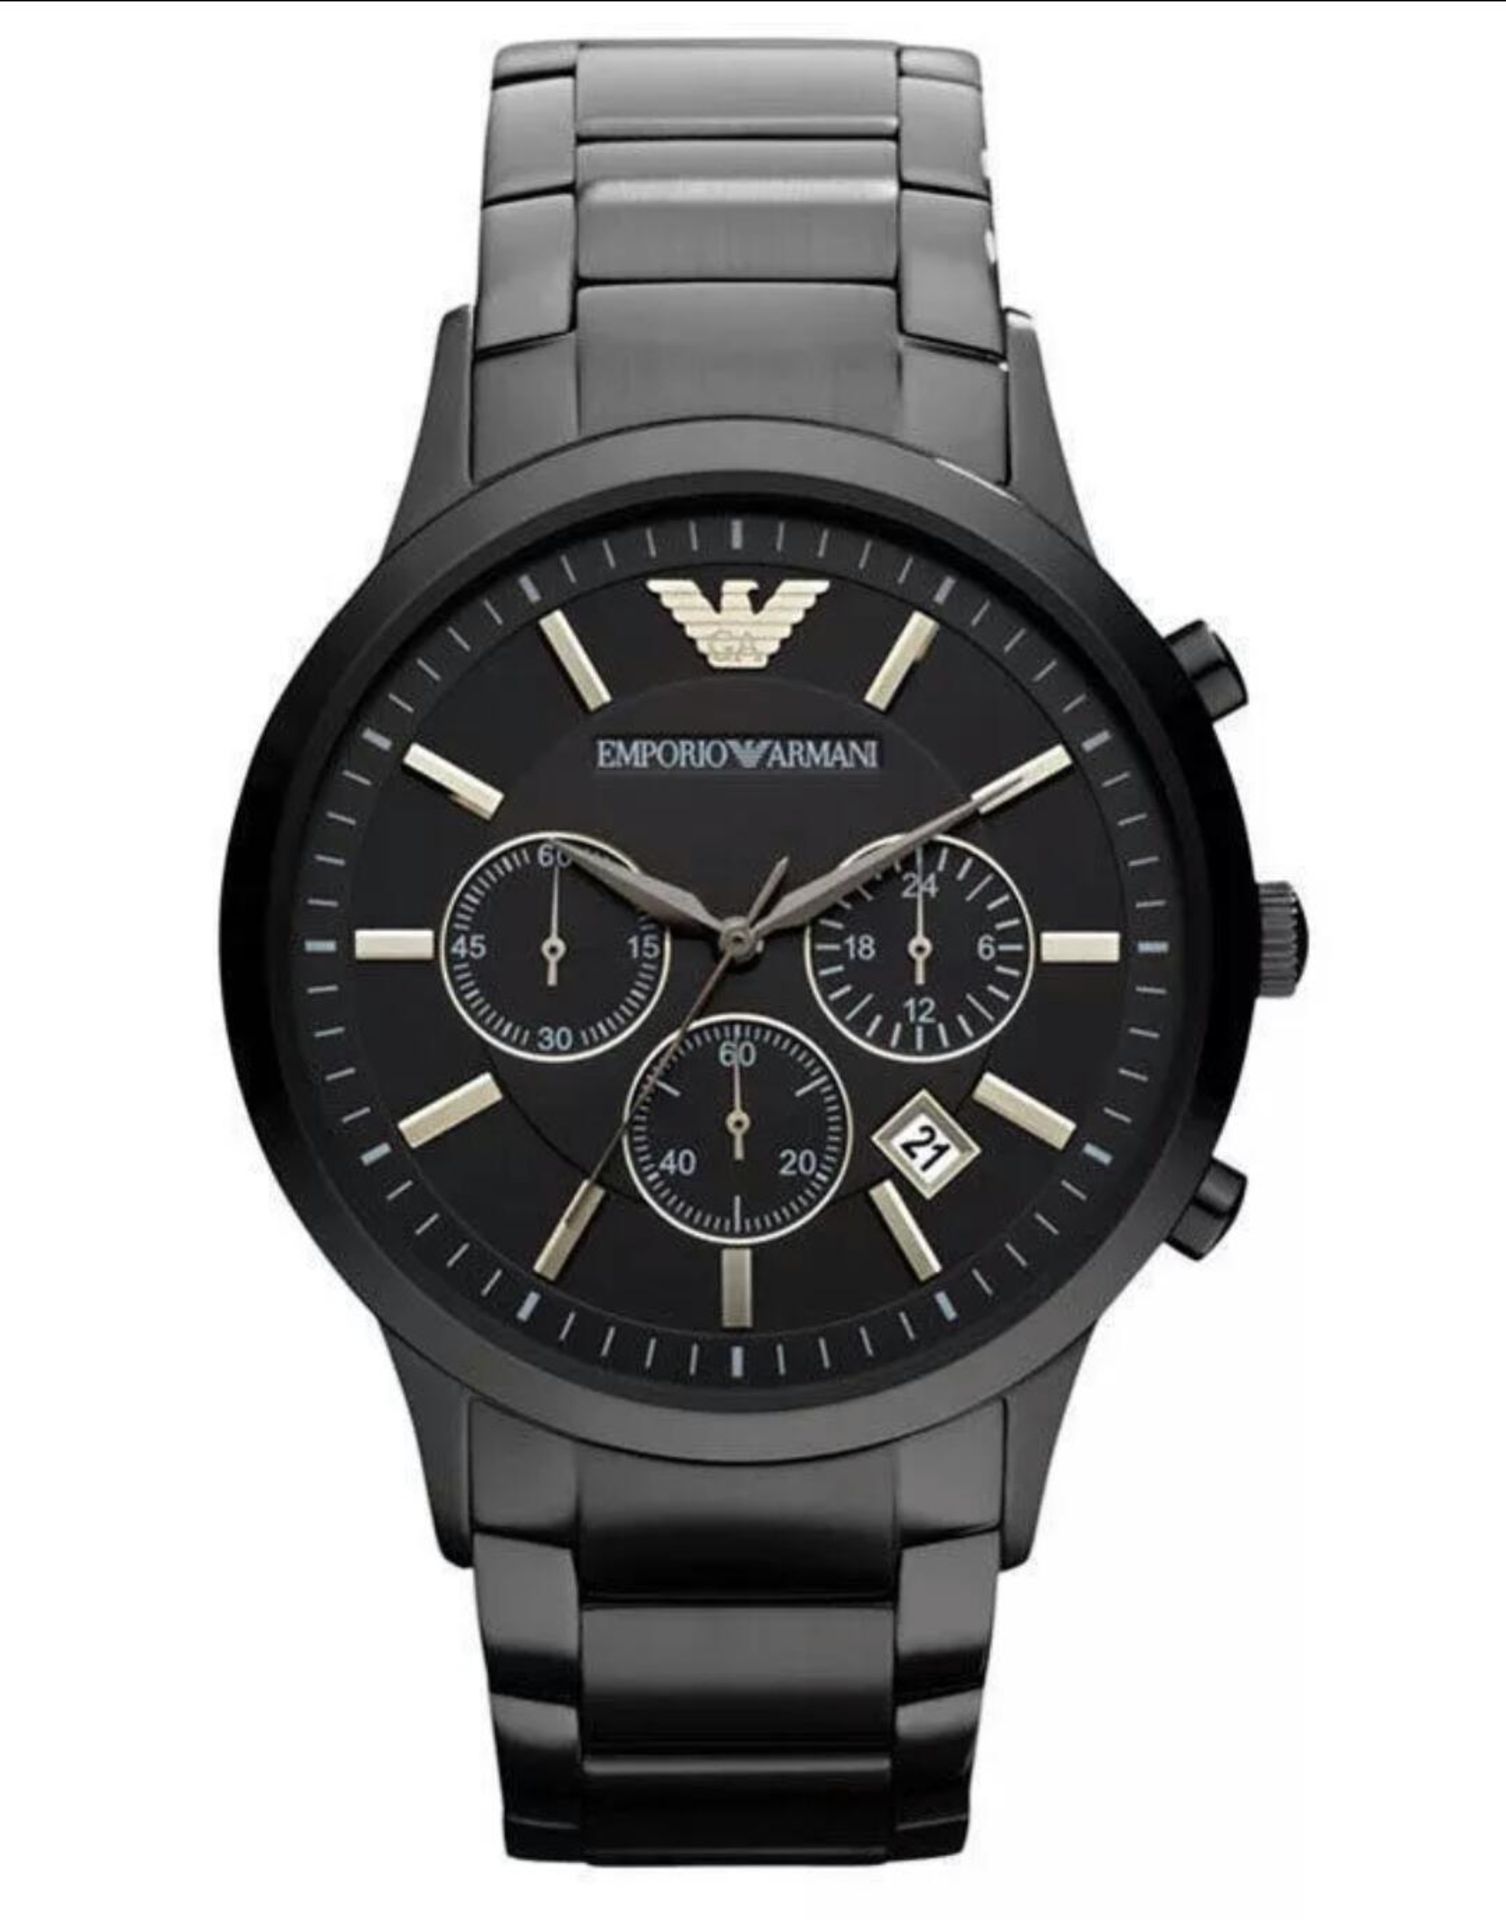 BRAND NEW EMPORIO ARMANI AR2453, GENTS ION PLATED CHRONOGRAPH WATCH, WITH A BLACK CIRCULAR DIAL -